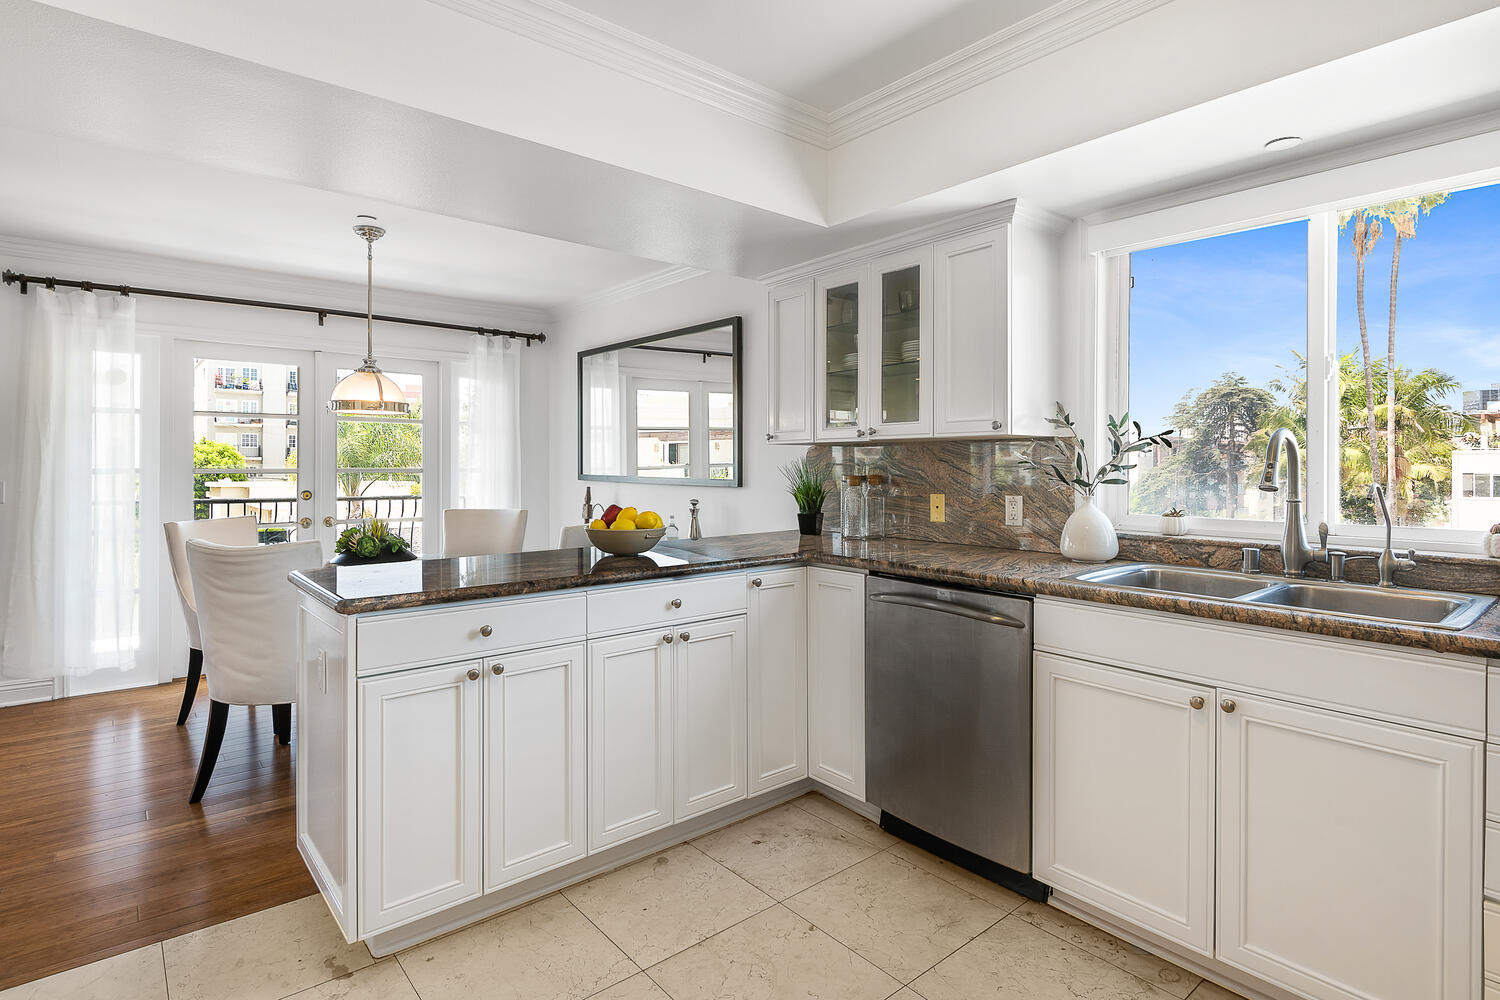 Kitchen with white cabinets, multi-colored granite and stainless appliances. View into dining area